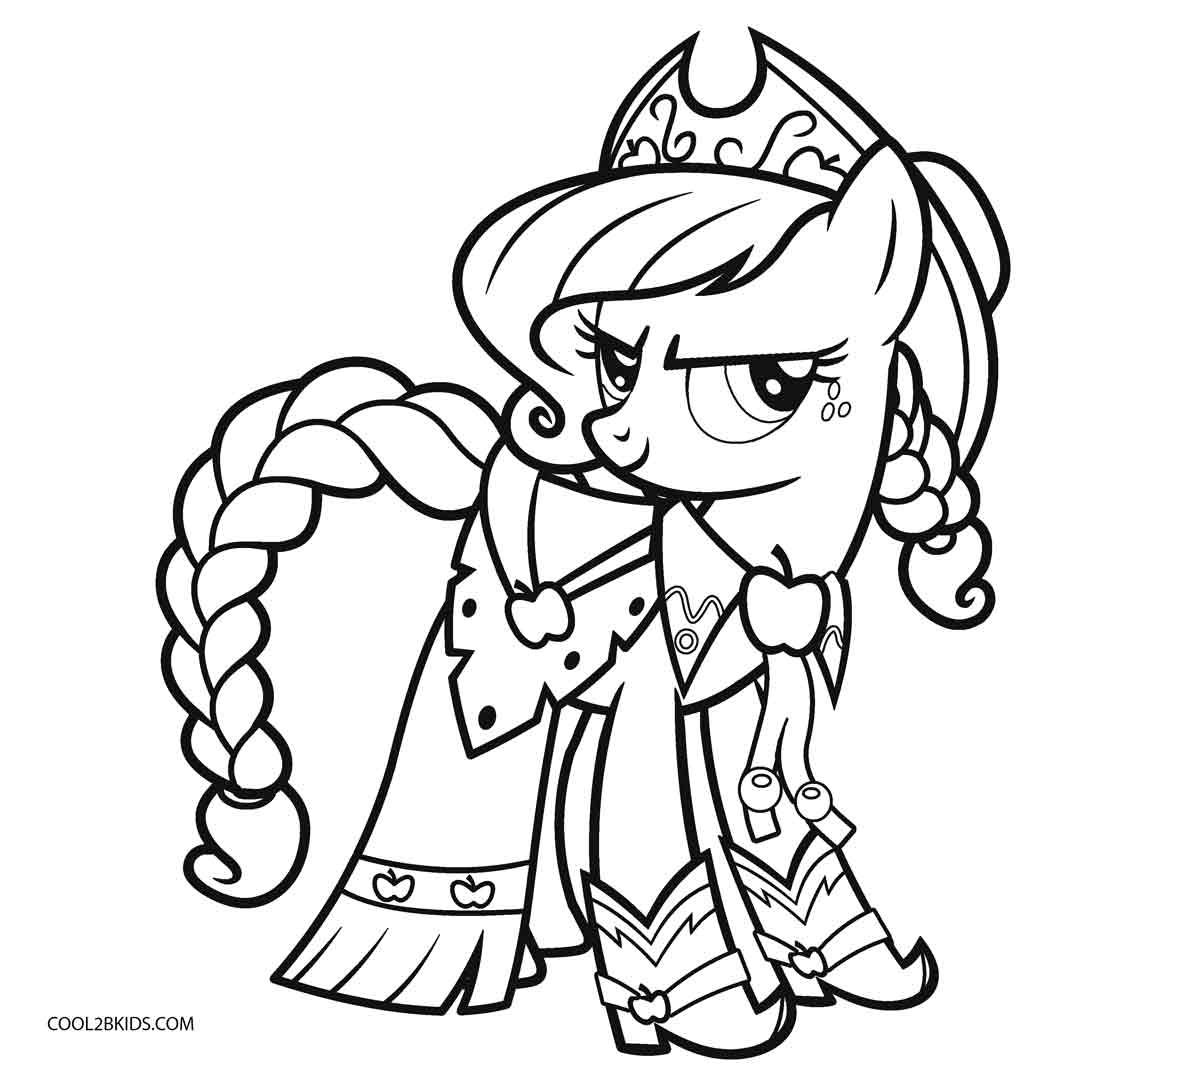 Free Printable My Little Pony Coloring Pages For Kids | Cool2Bkids - Free Printable My Little Pony Coloring Pages